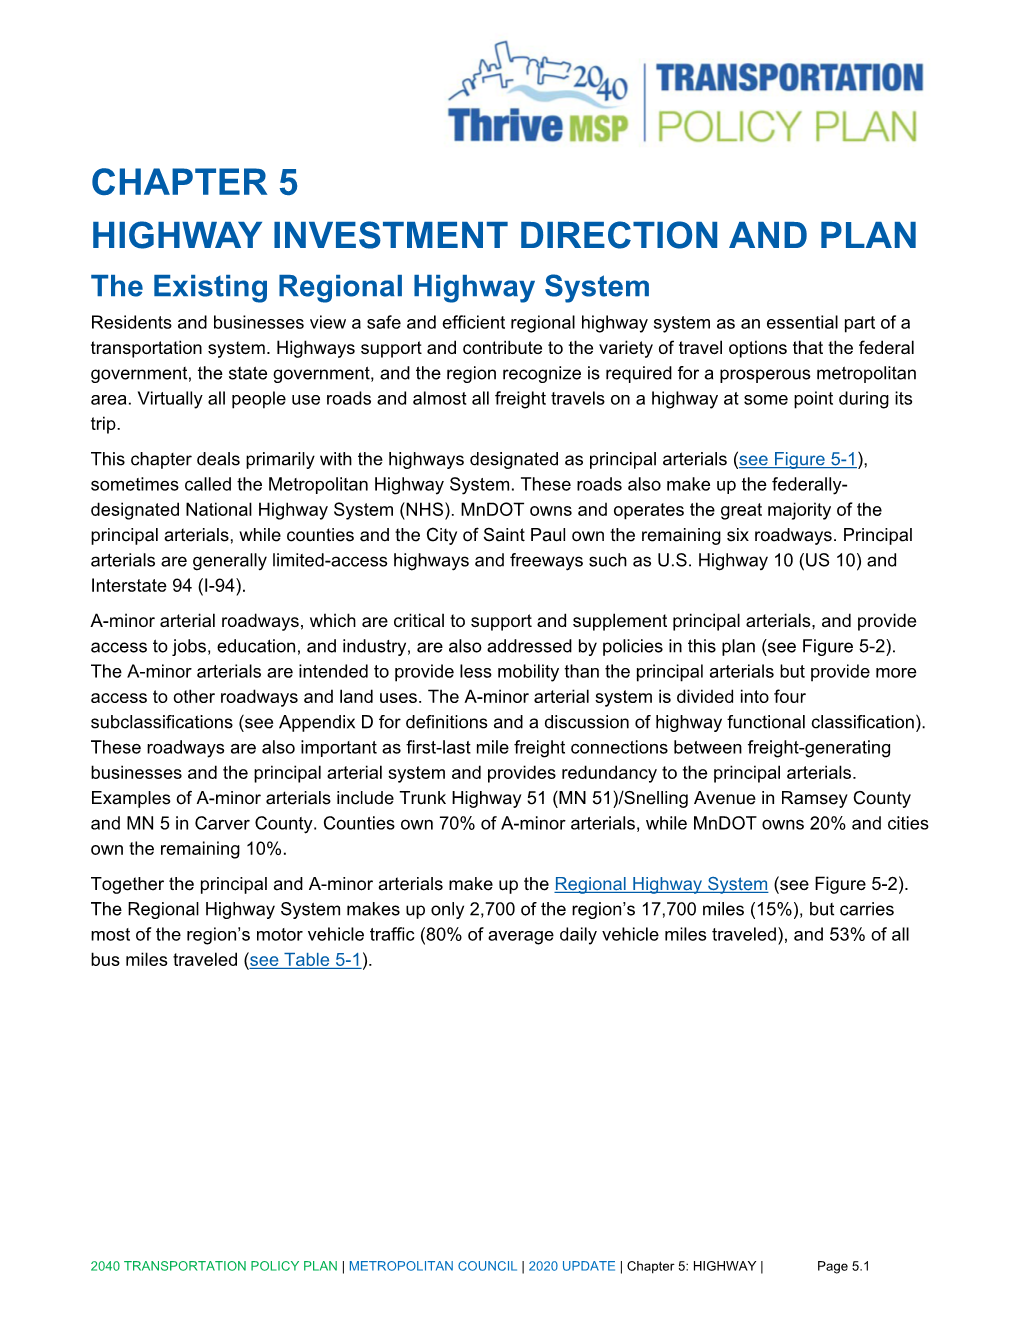 Chapter 5 Highway Investment Direction and Plan